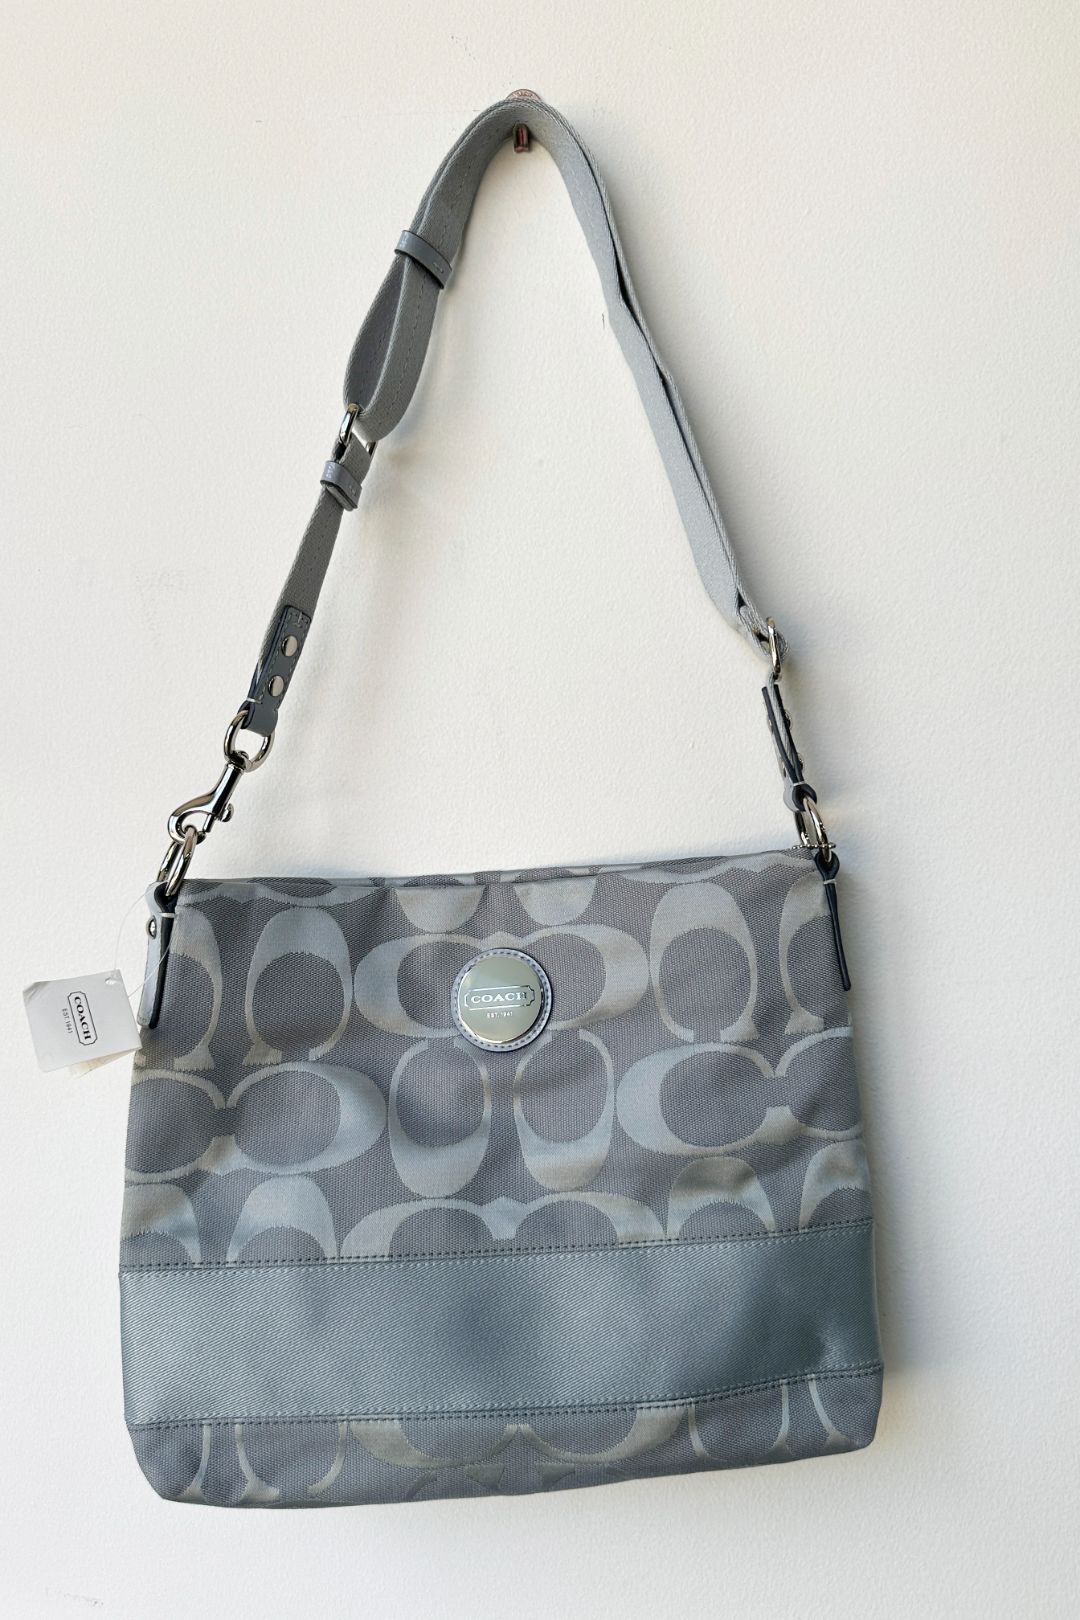 Coach Canvas Crossbody Bag in Silver and Gray